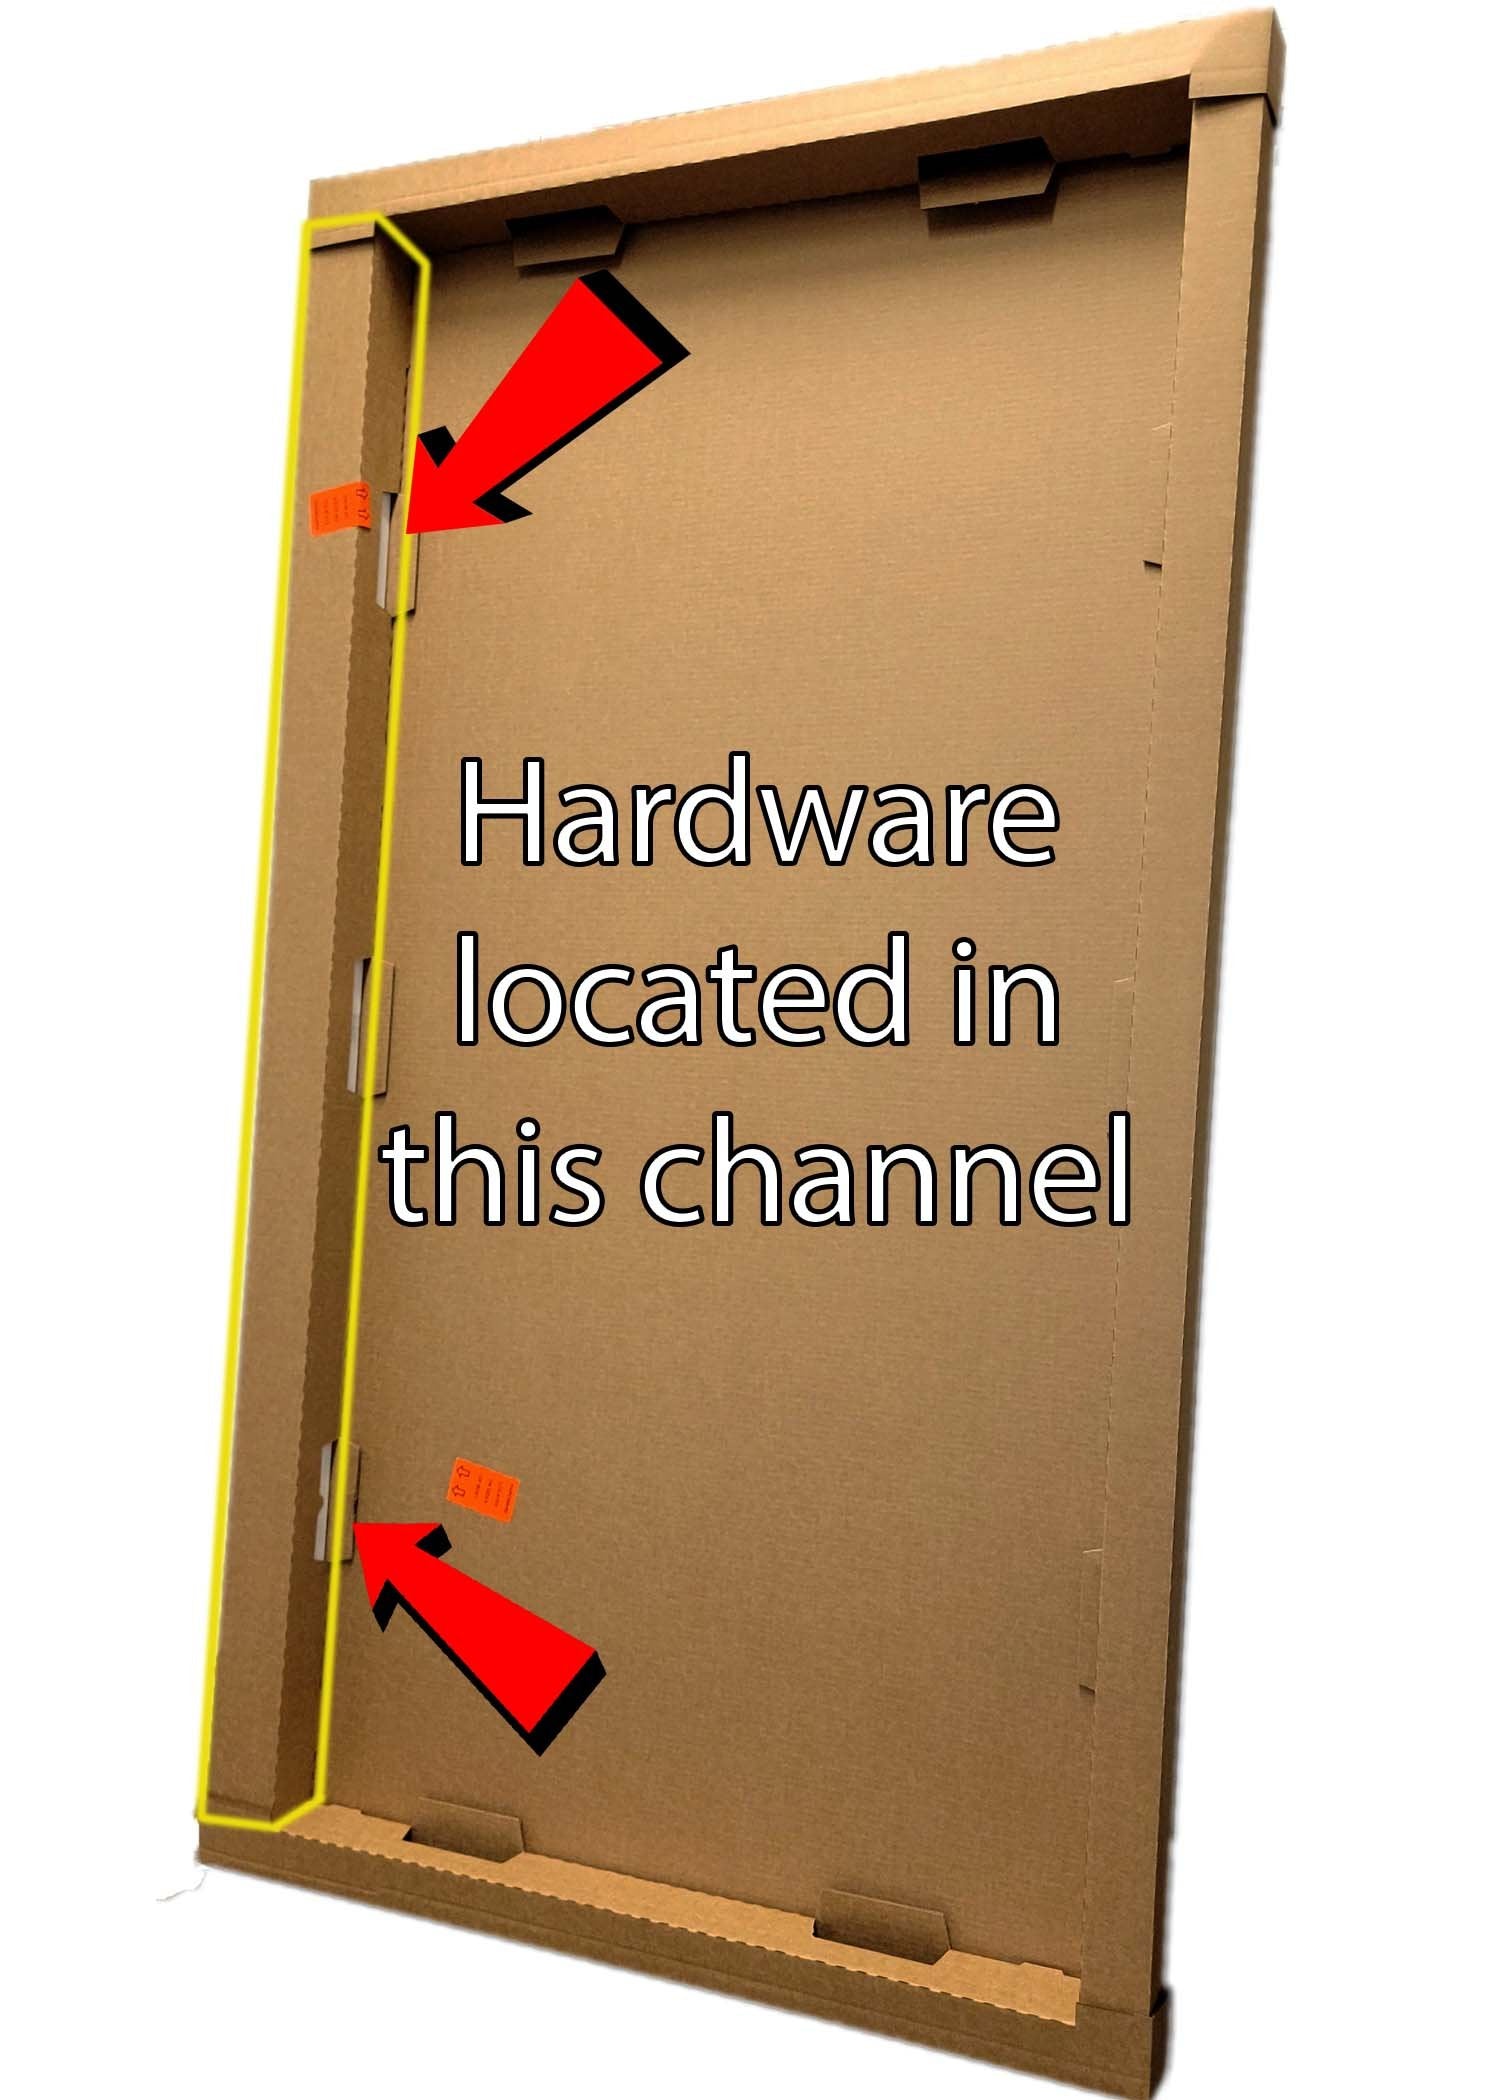 Graphic showing where the hardware located